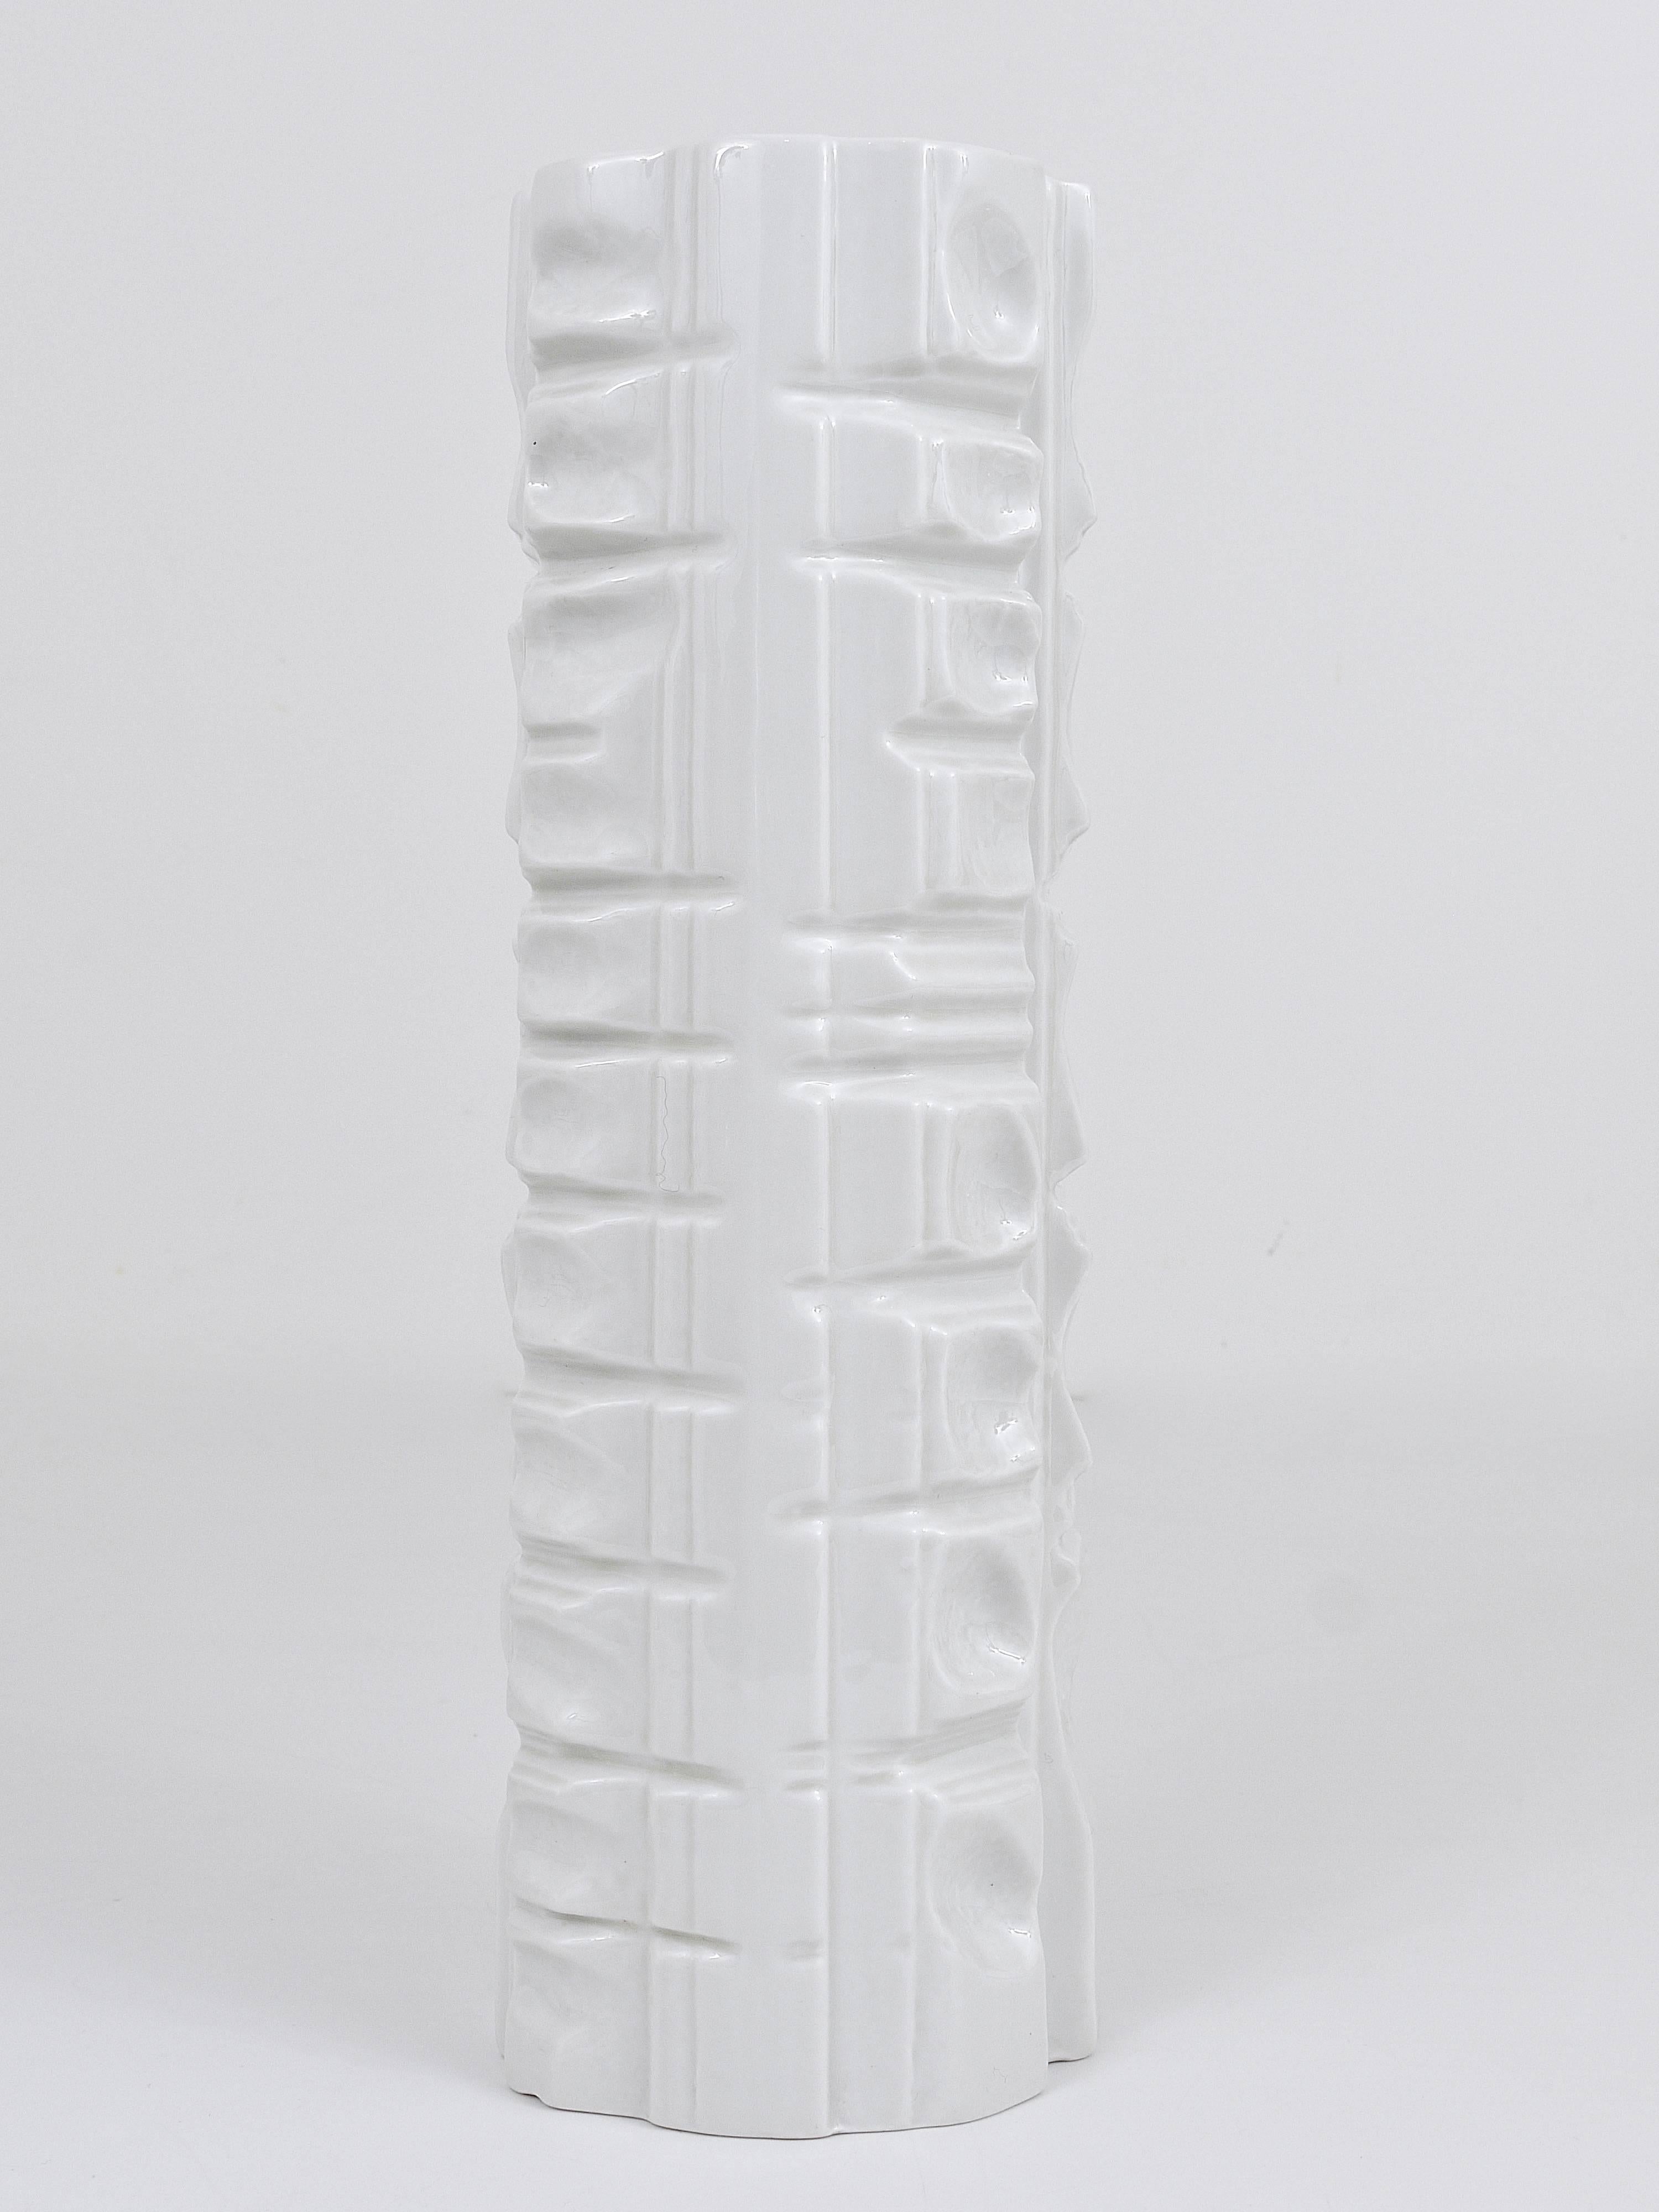 A beautiful white porcelain op art relief vase with shiny glaze from the 1960s, designed and executed by Rosenthal, Germany. In very good condition.